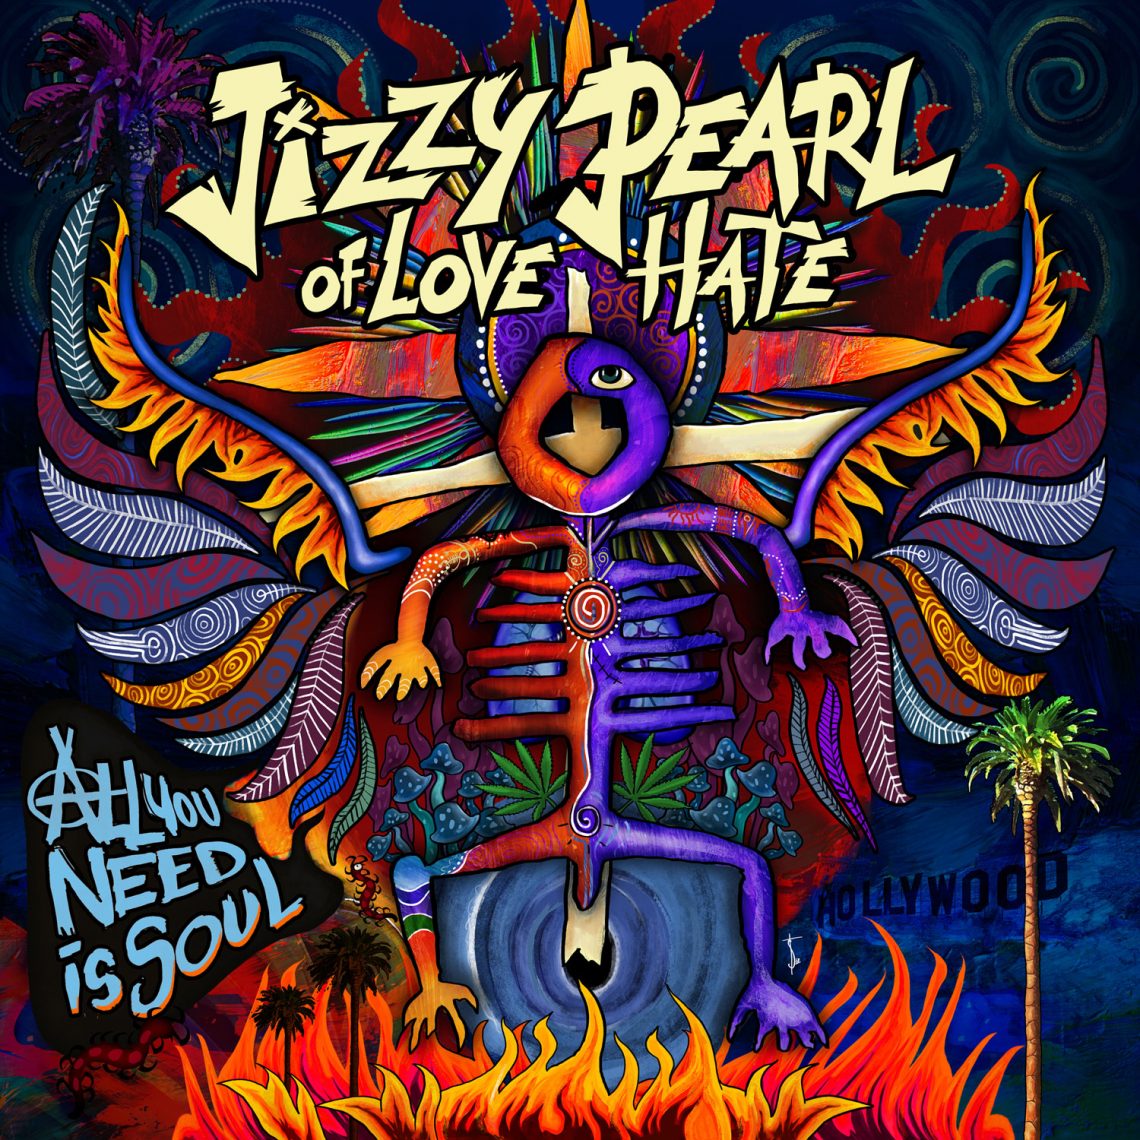 Jizzy Pearl of Love Hate releases new album All You Need Is Soul 11 May via Frontiers Music Srl